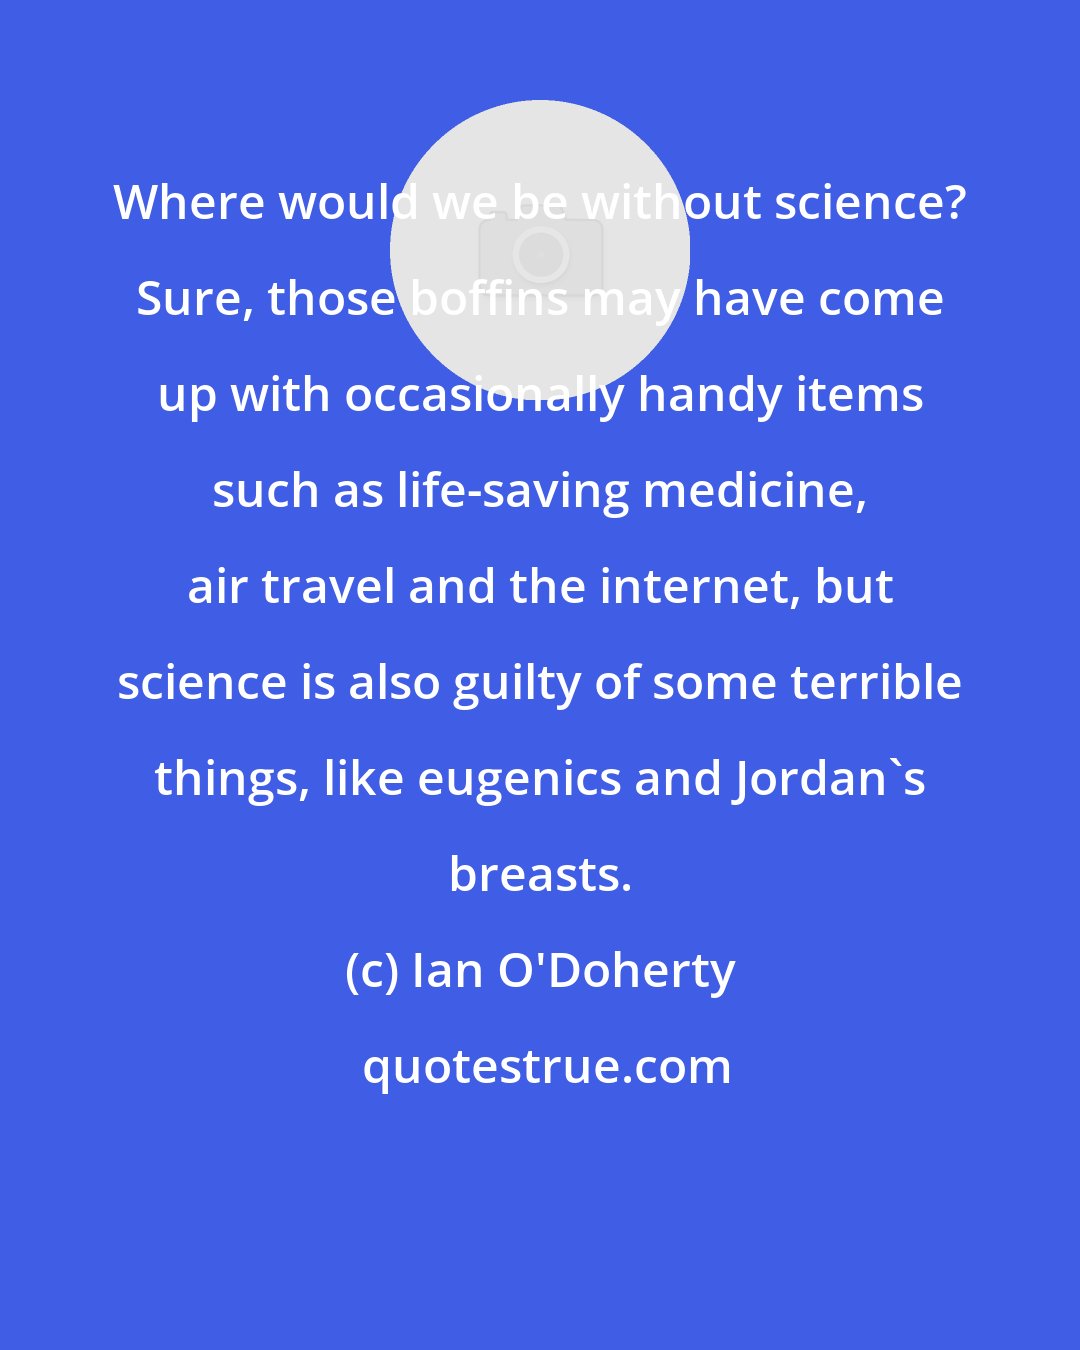 Ian O'Doherty: Where would we be without science? Sure, those boffins may have come up with occasionally handy items such as life-saving medicine, air travel and the internet, but science is also guilty of some terrible things, like eugenics and Jordan's breasts.